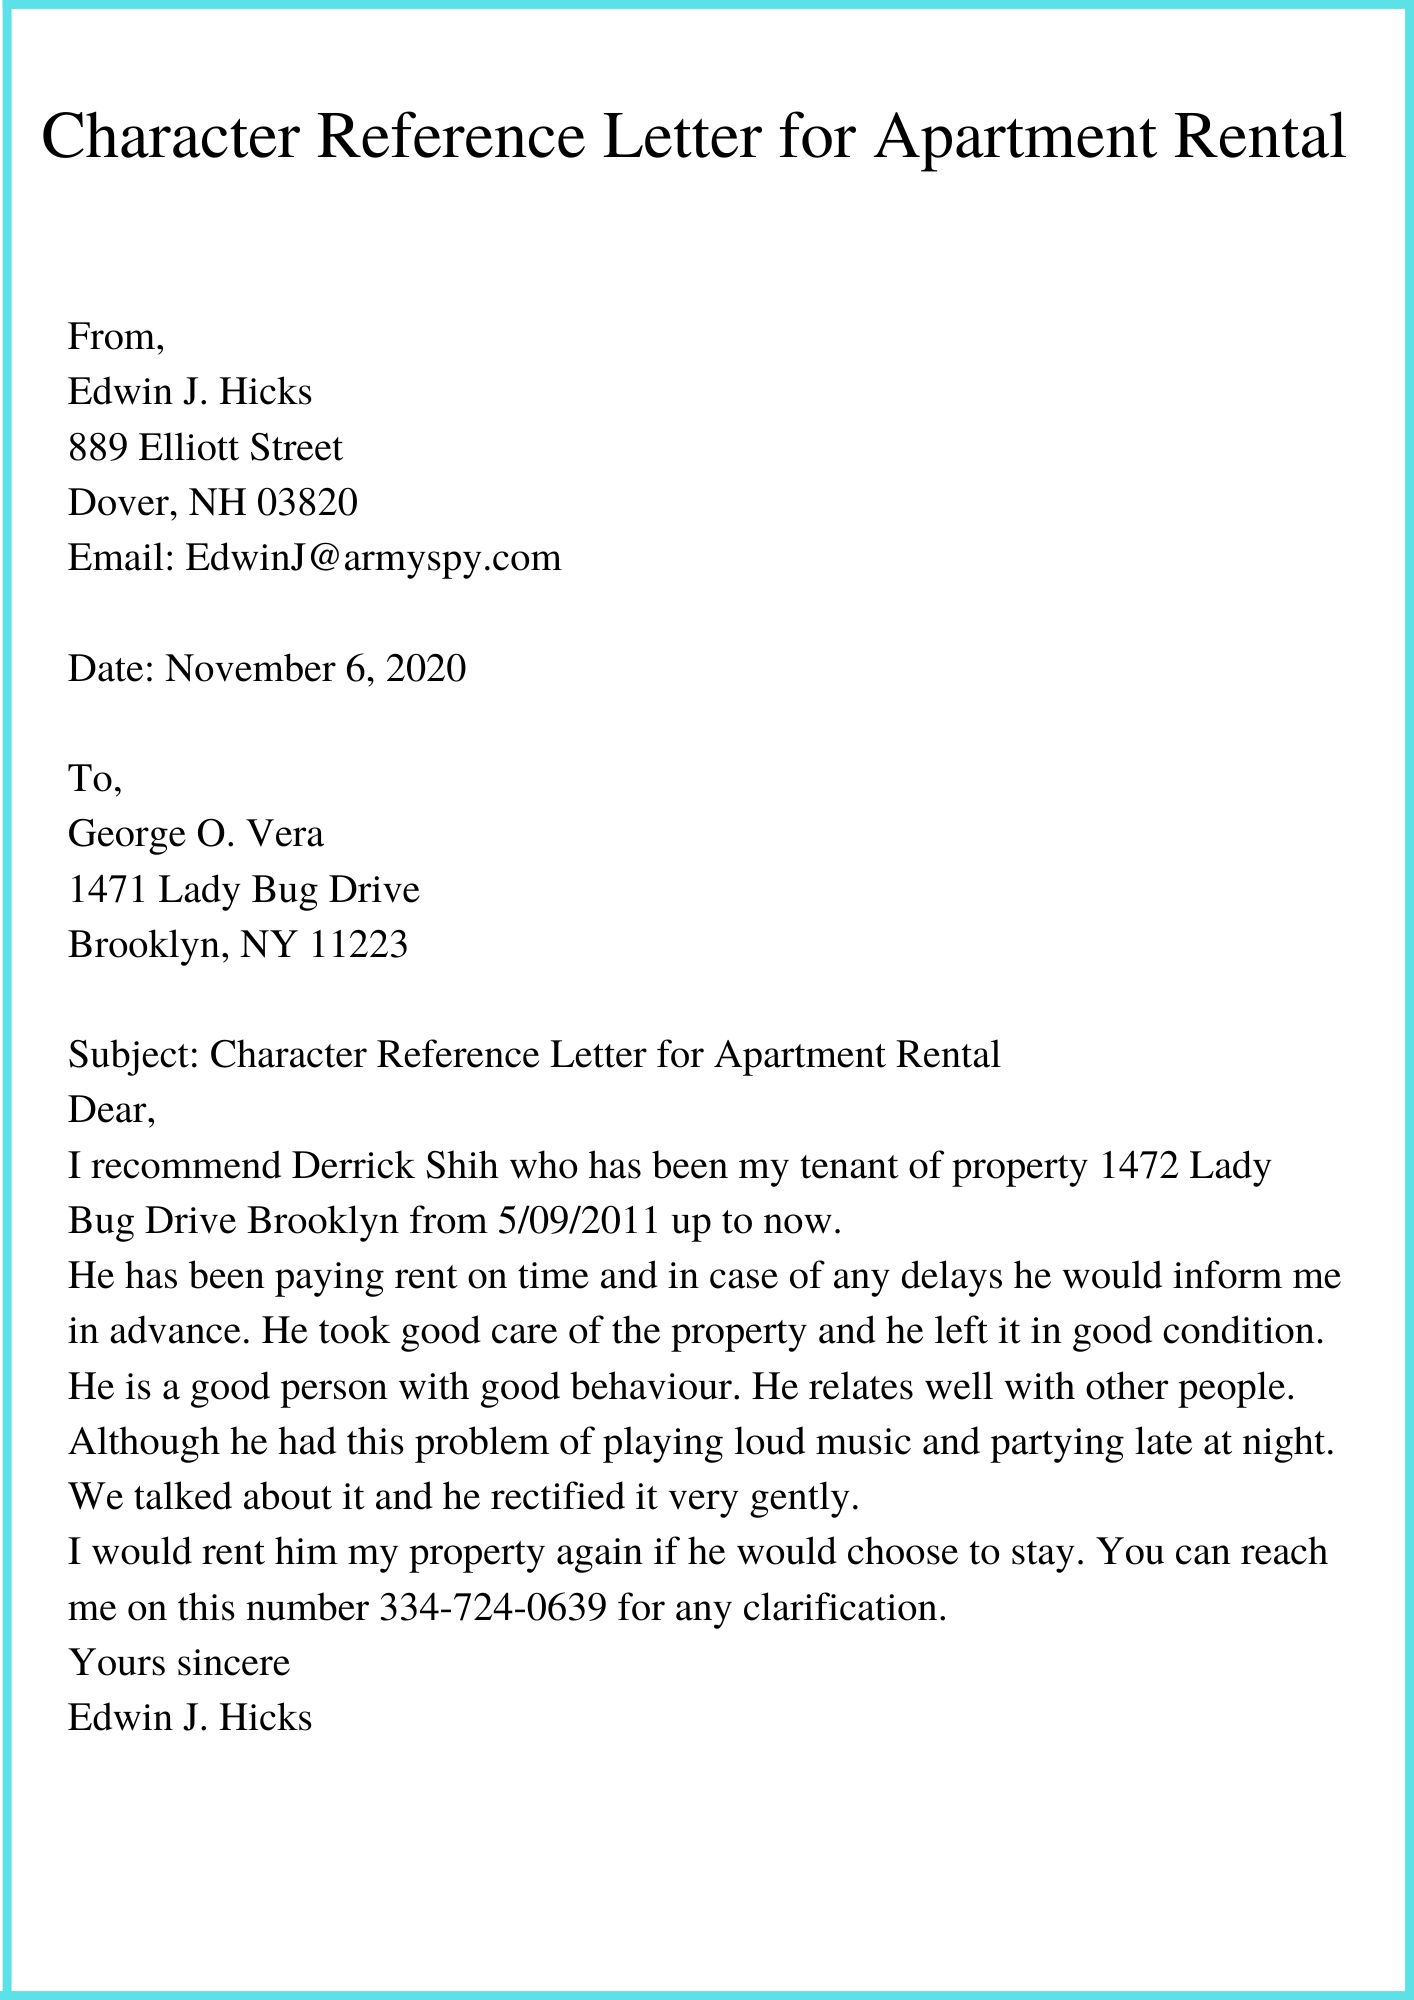 Character Reference Letter for Apartment Rental 